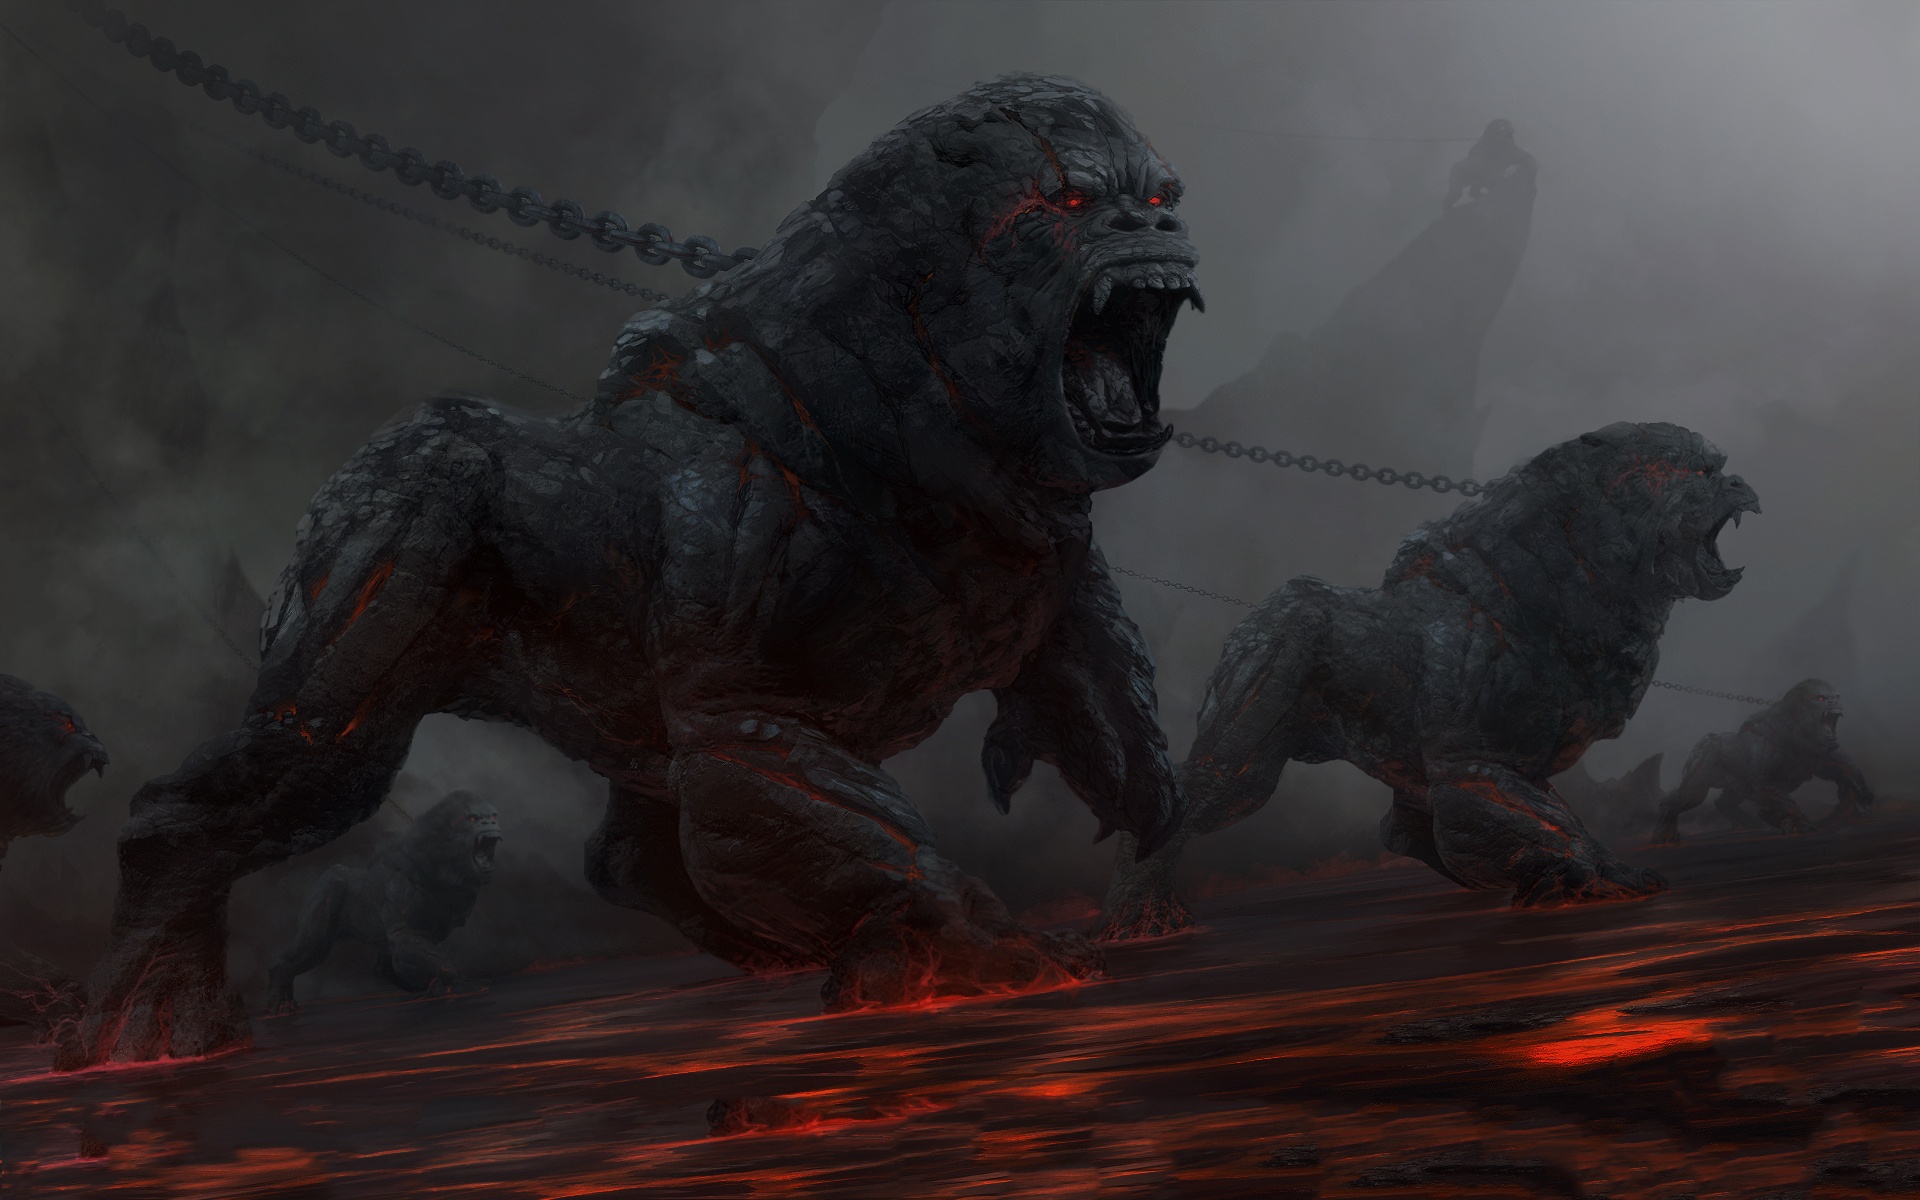 fantasy, Art, Dark, Horror, Evil, Demons, Gorilla, Animals, Fire, Hell,  Chains, Monsters, Beast, Creature, Eyes, Scream, Roar, Landscapes, Scary  Wallpapers HD / Desktop and Mobile Backgrounds